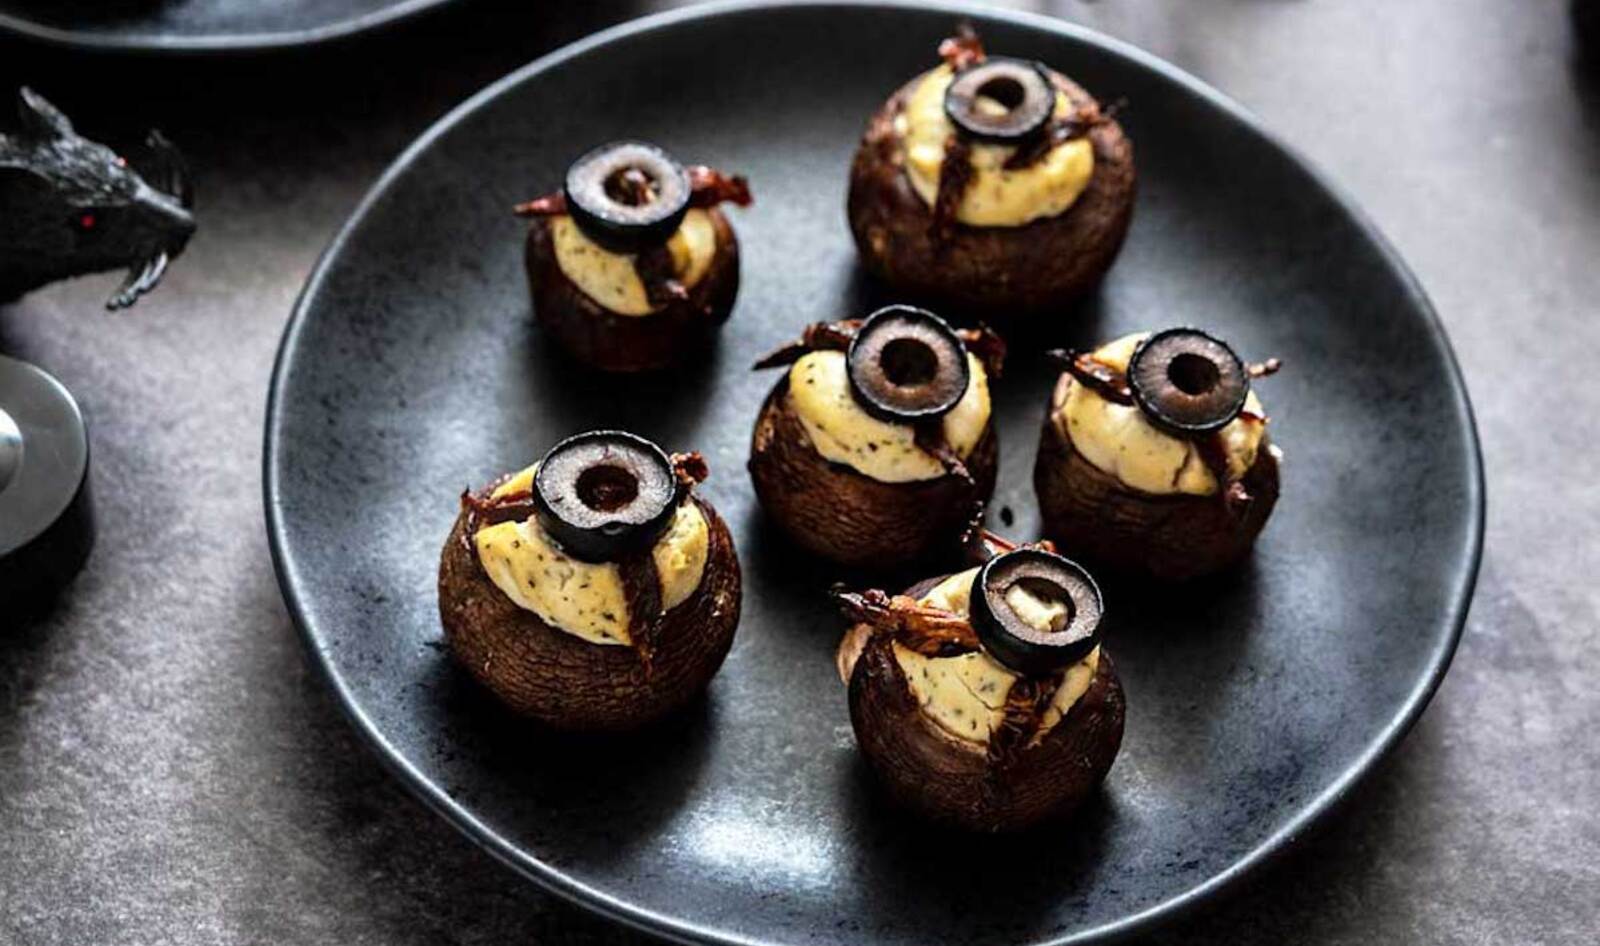 These 8 Vegan Halloween Recipes Are So Good They’re Spooky!